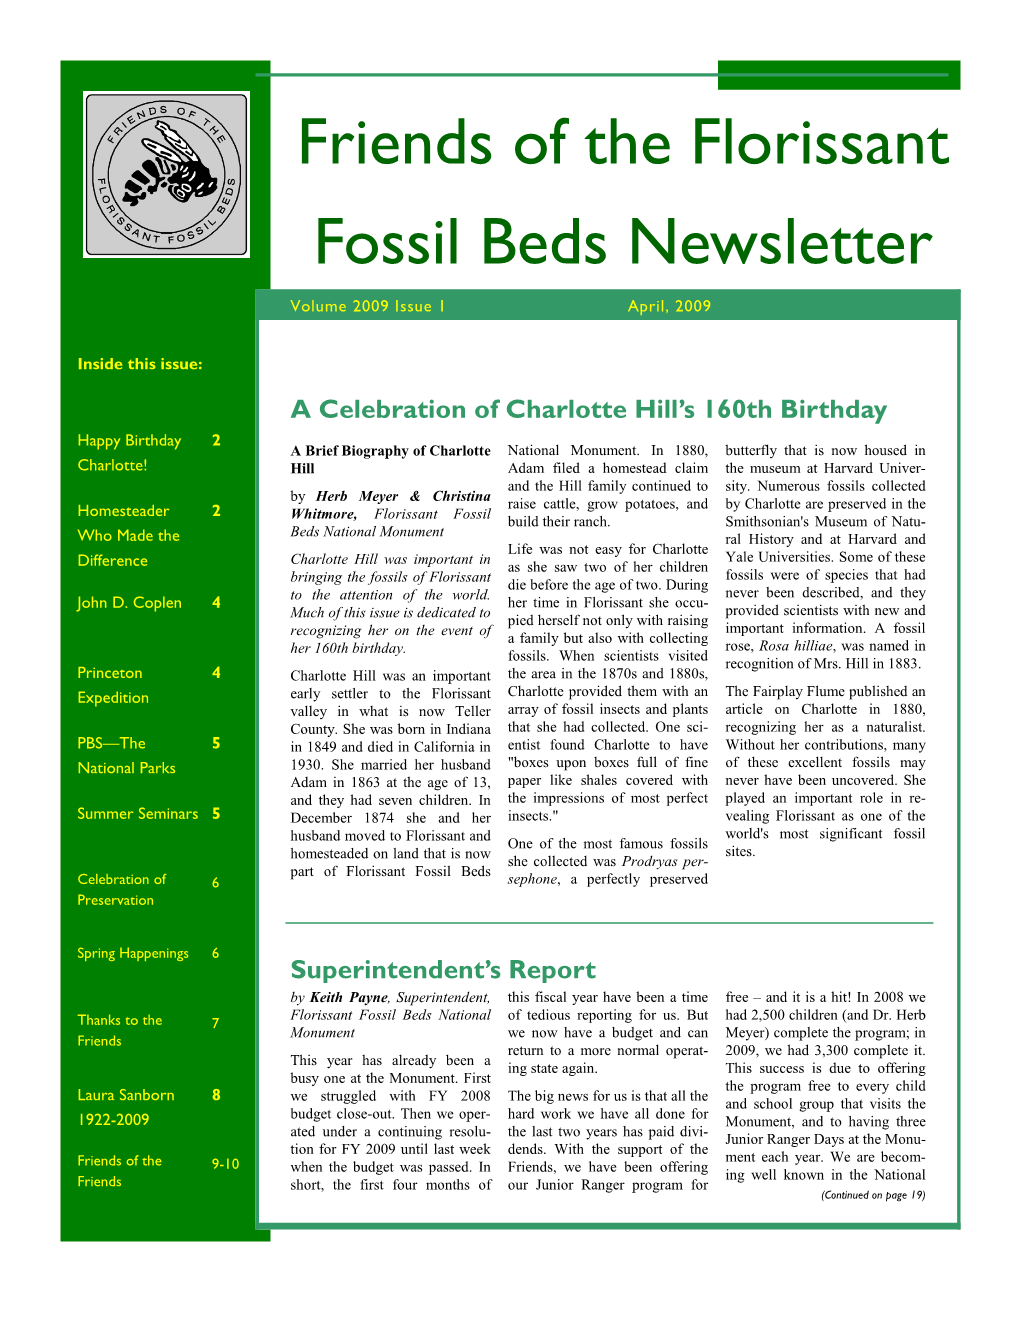 Friends of the Florissant Fossil Beds Newsletter